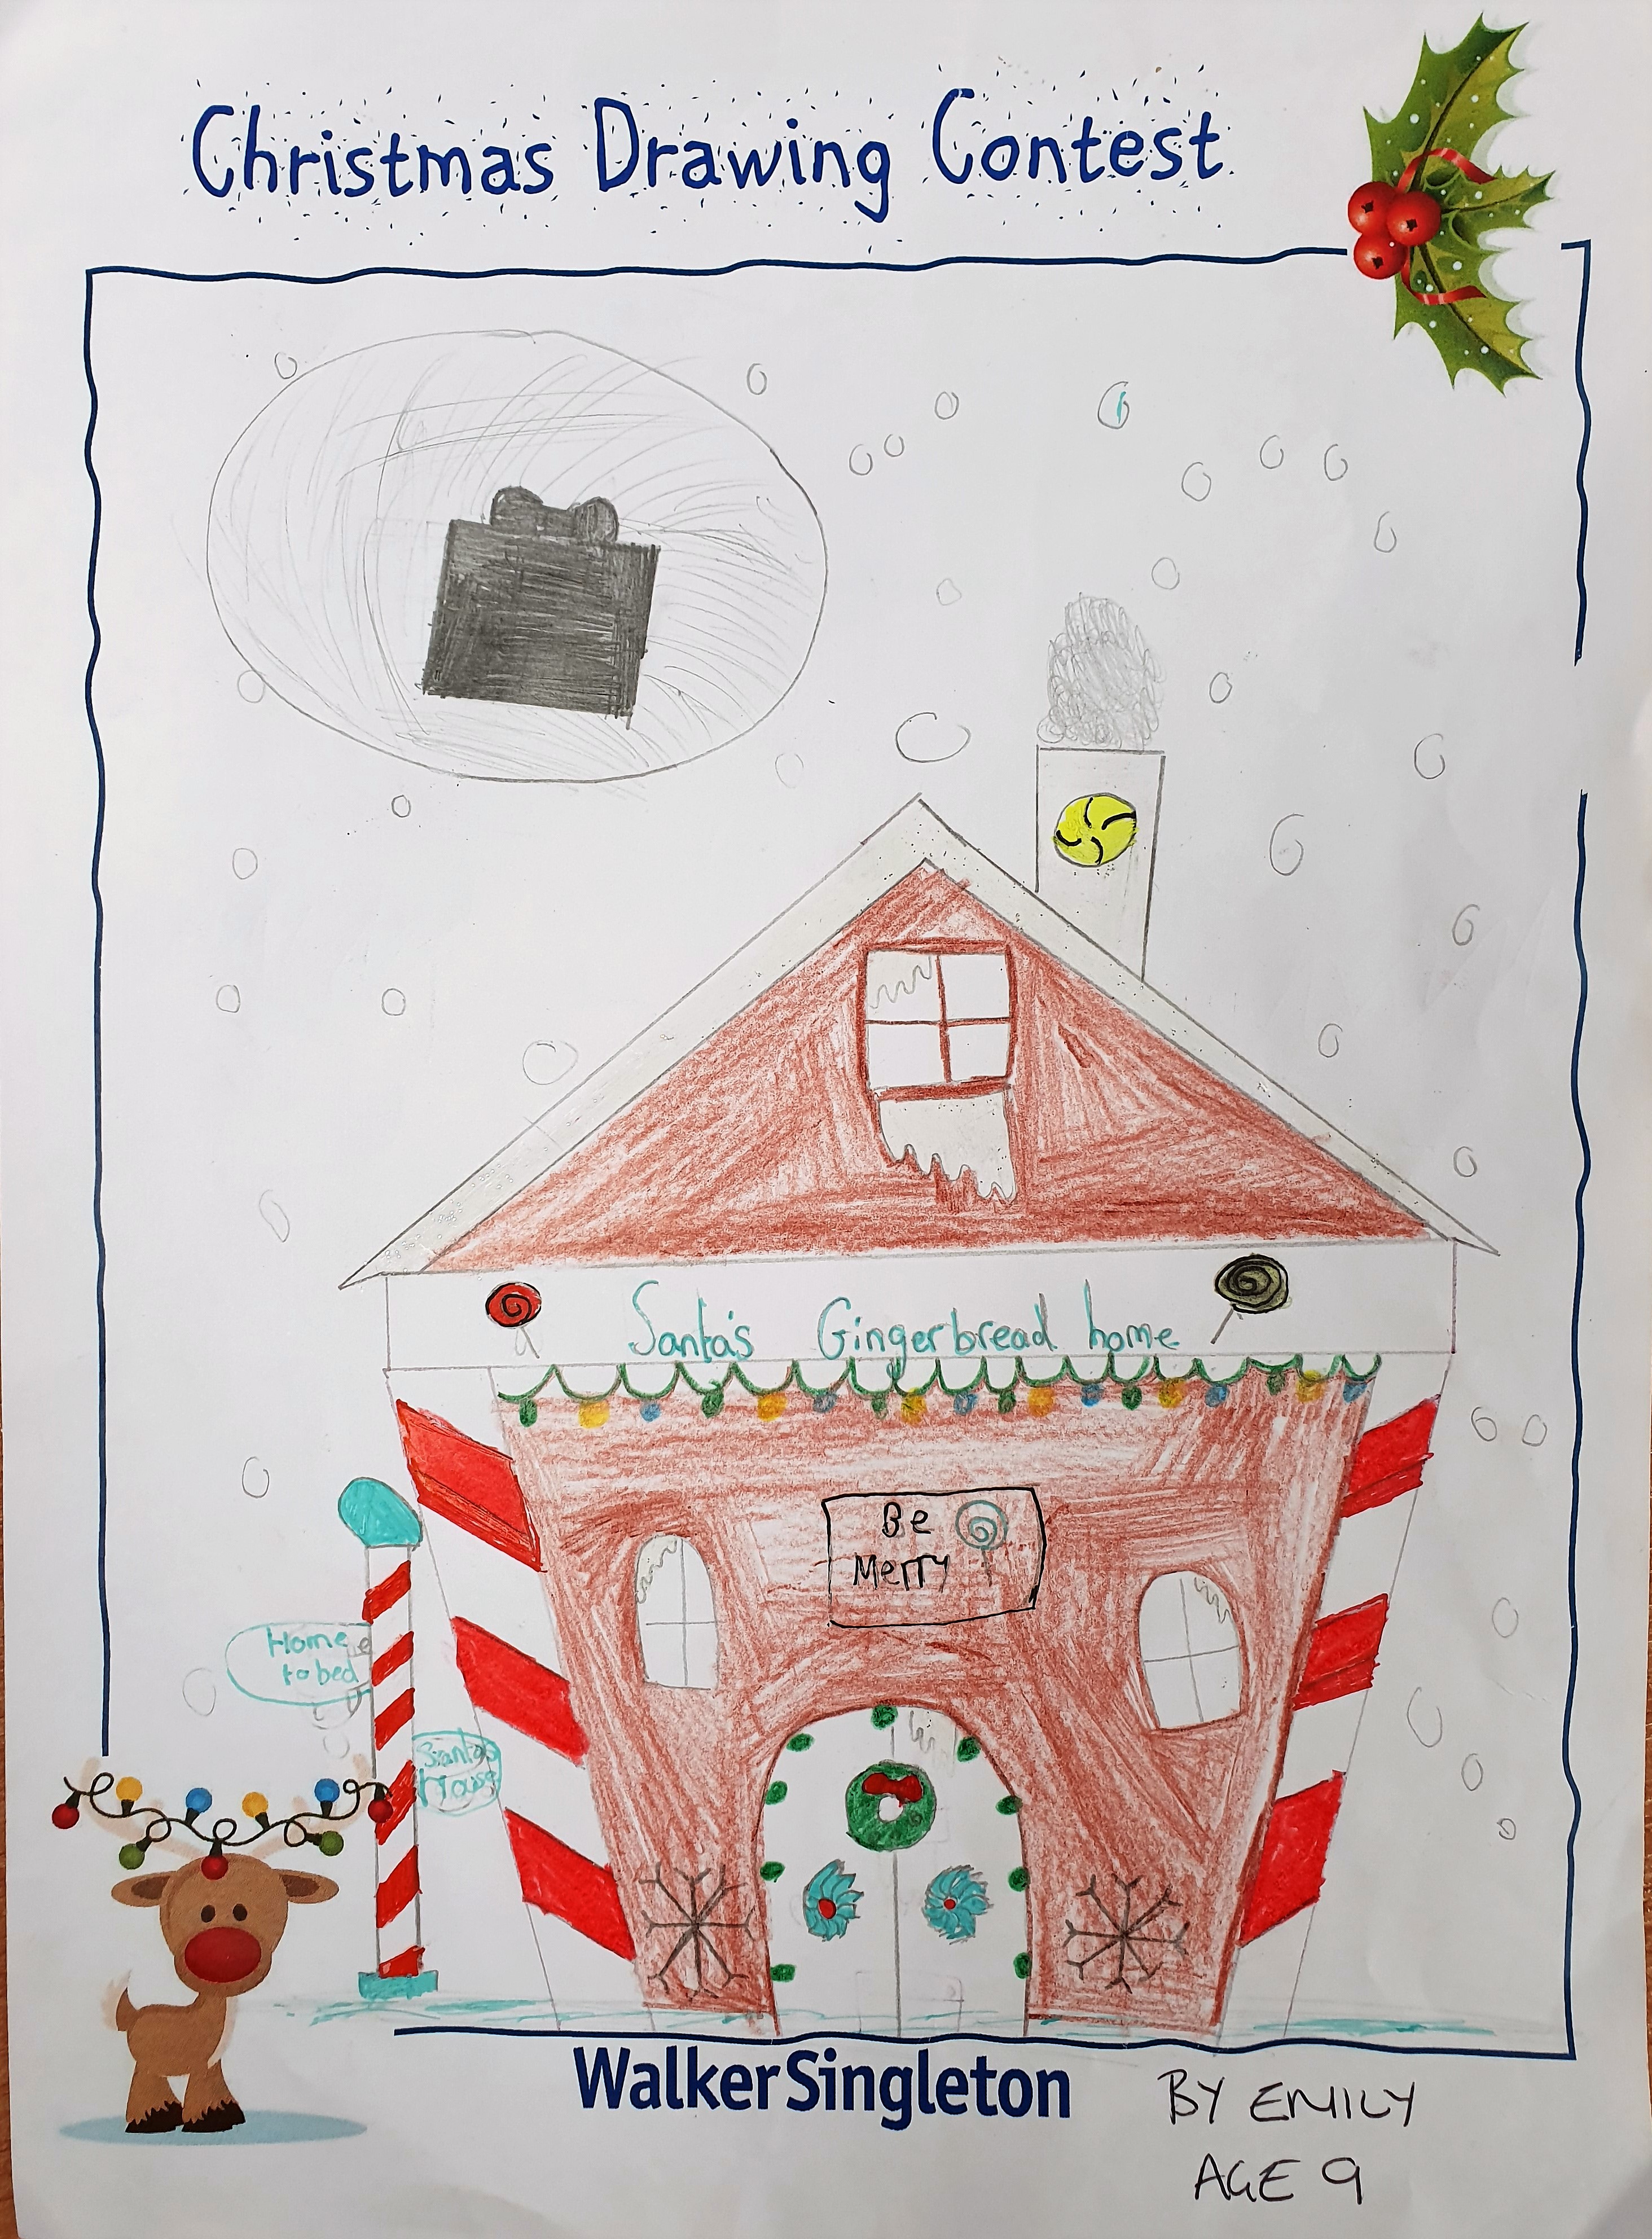 Christmas drawing contest Emily age 9